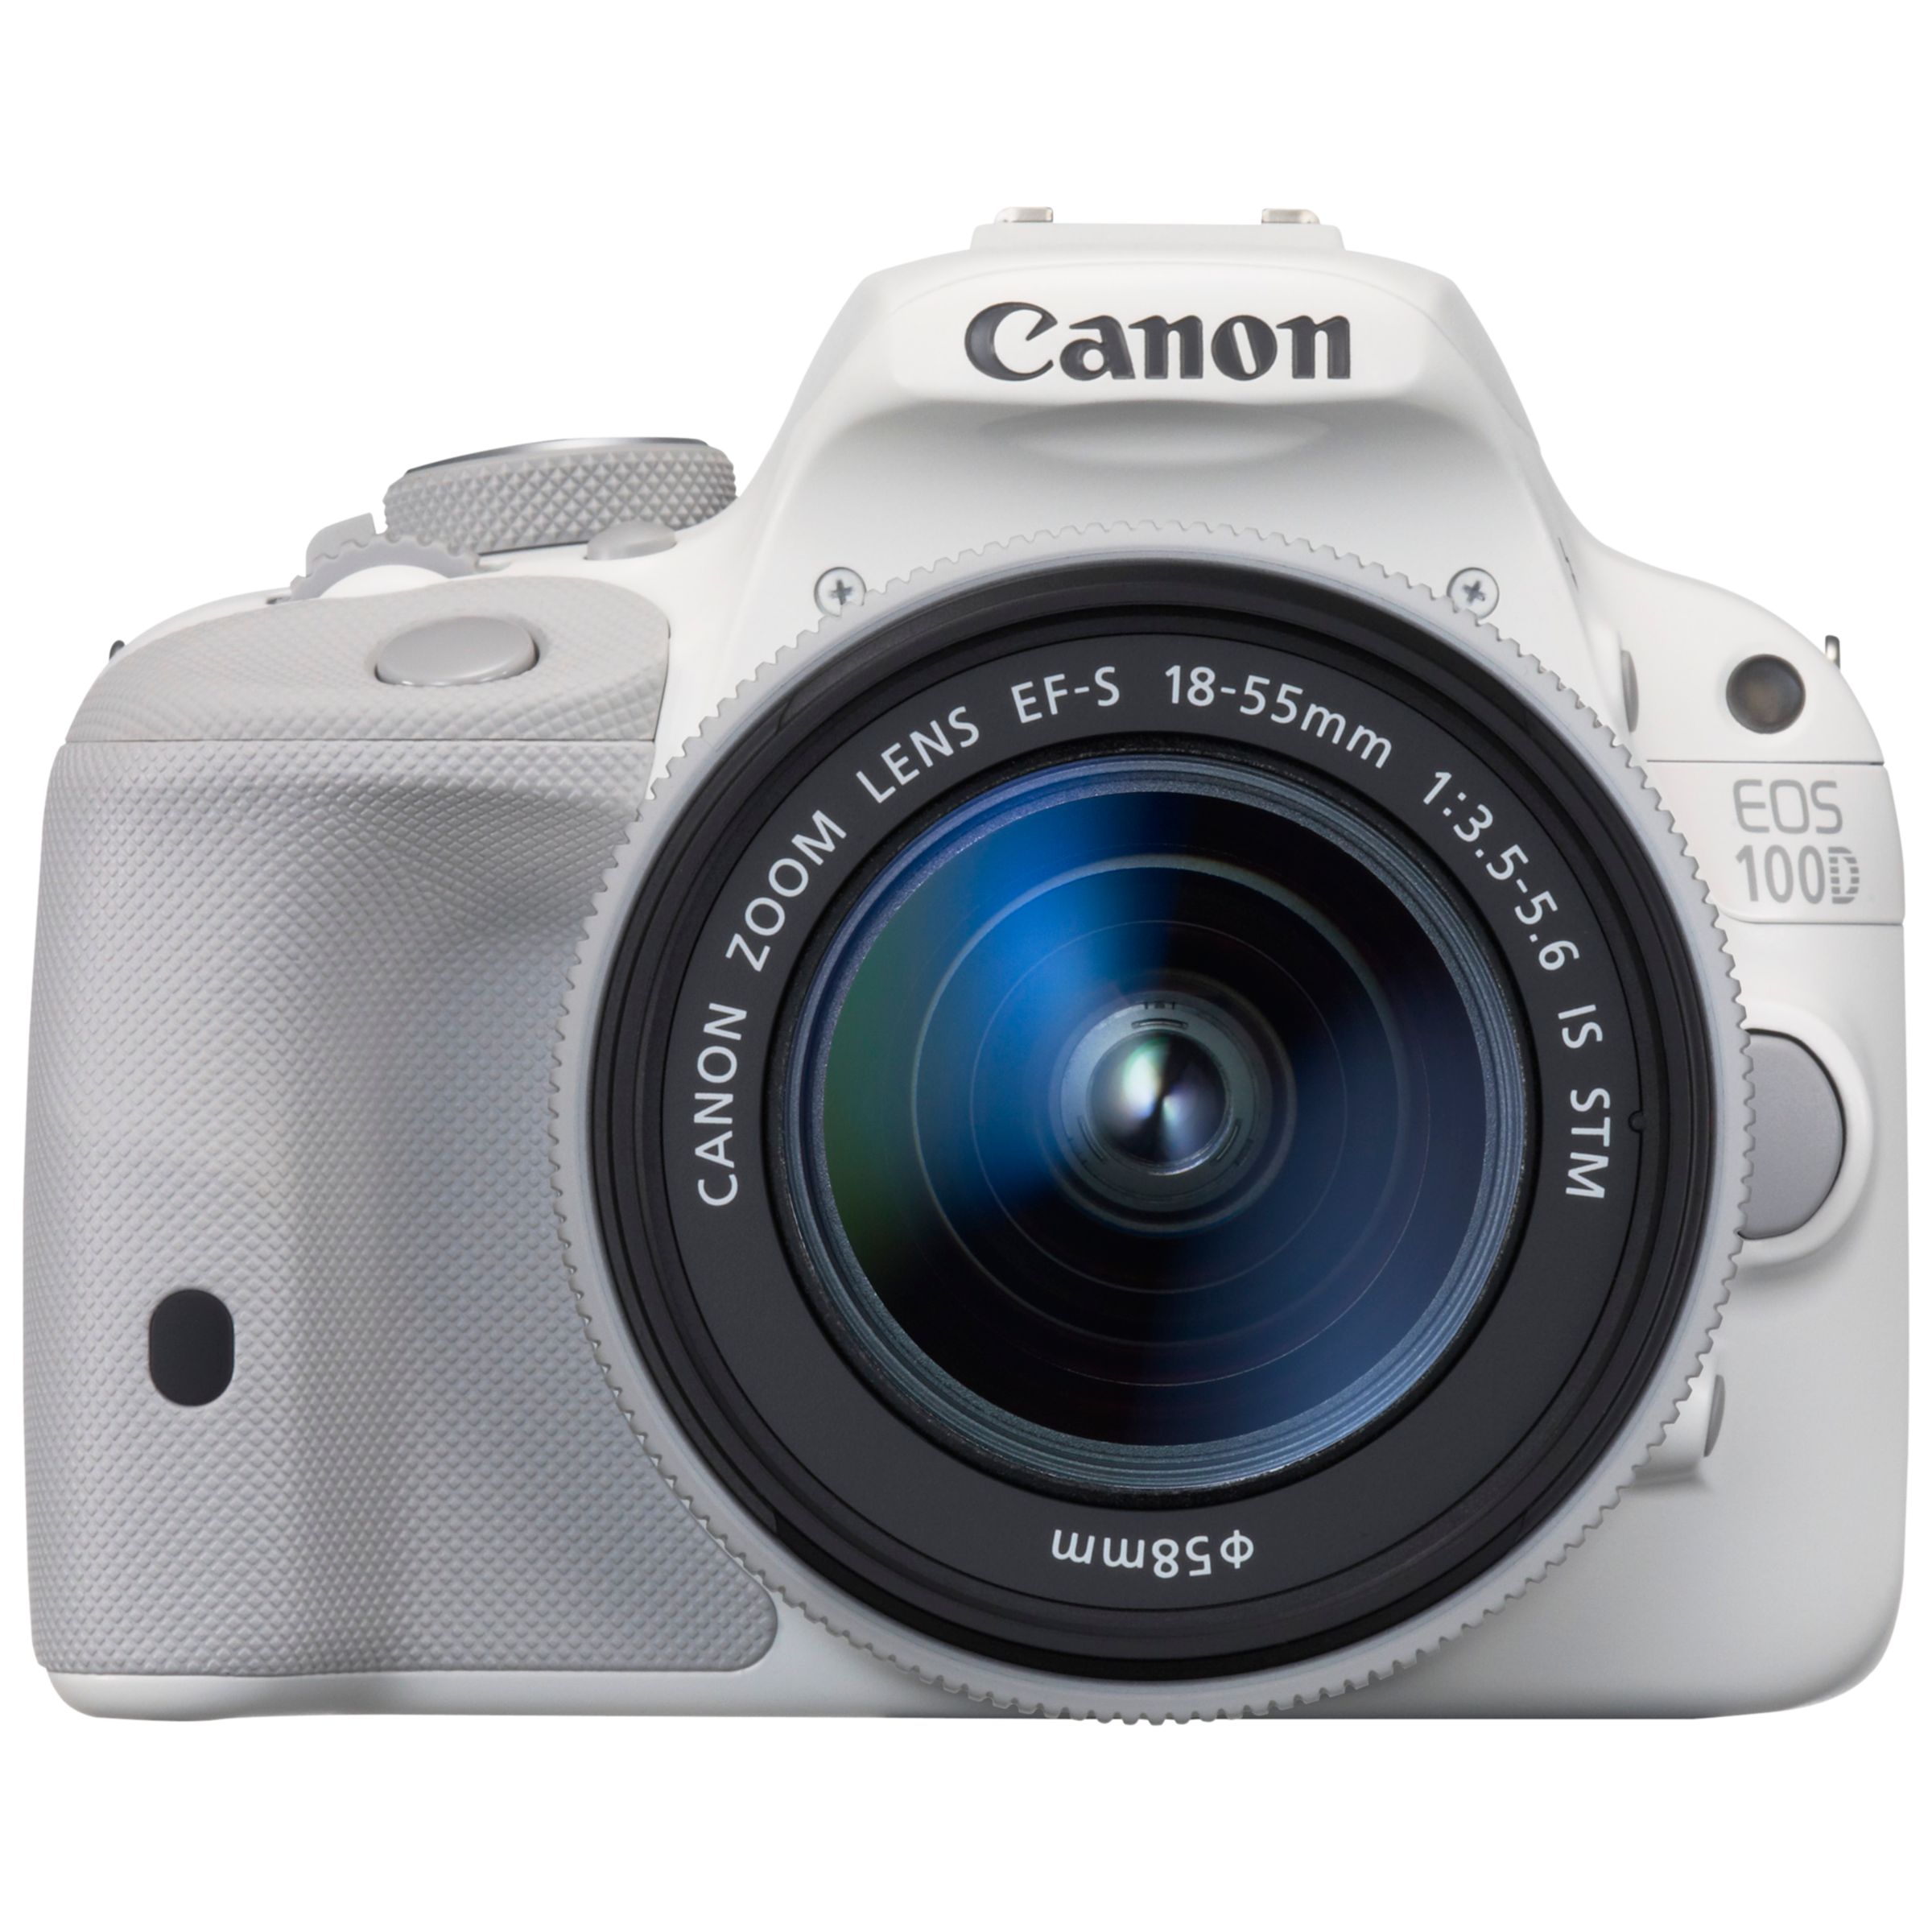 Canon EOS 100D Digital SLR Camera with 18-55mm IS STM Lens, HD 1080p, 18MP, 3" LCD Touch Screen, White